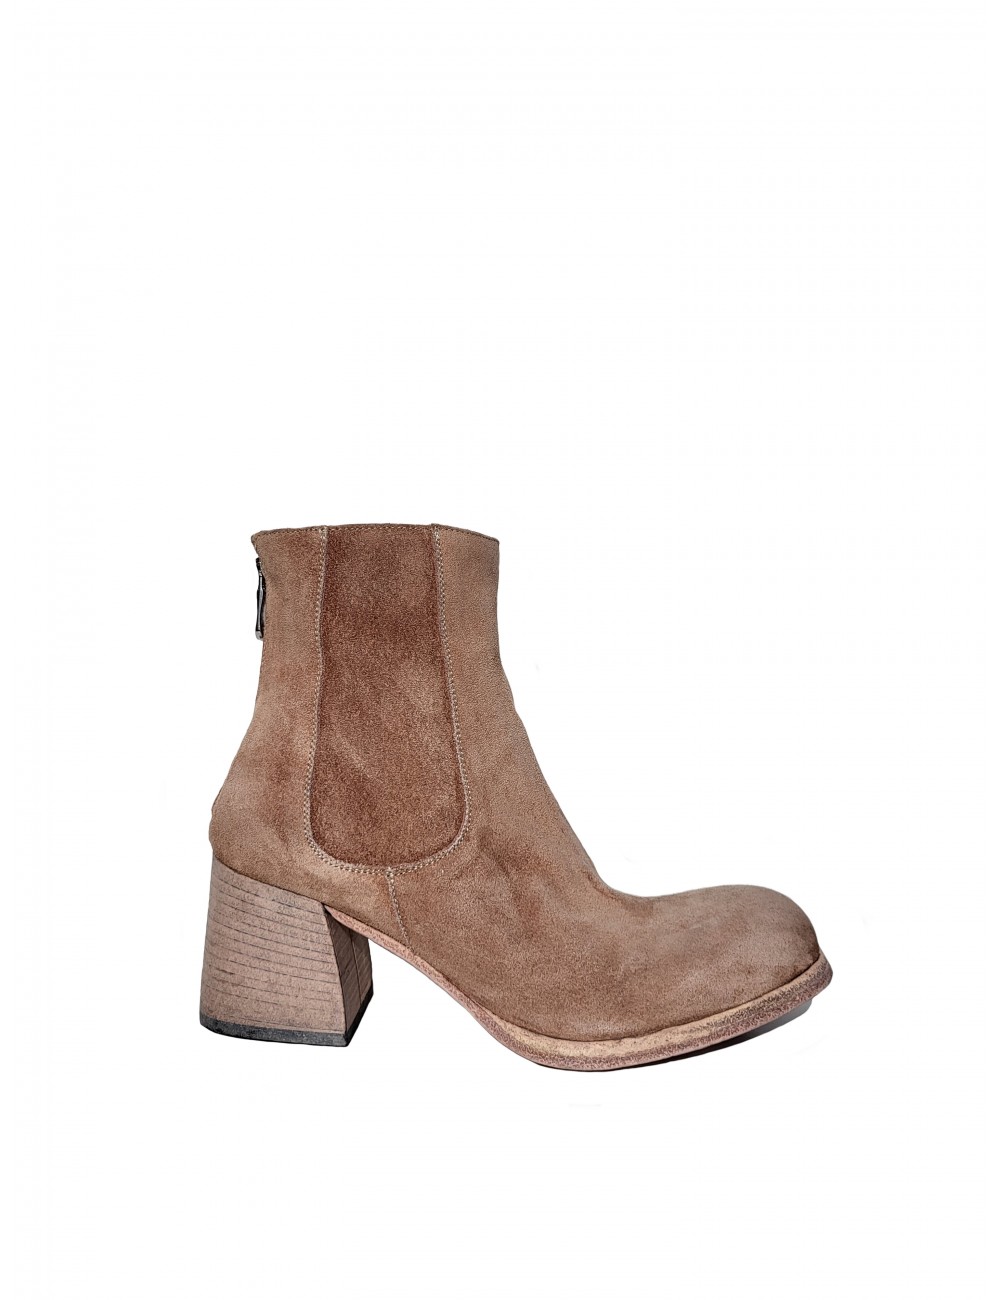 Women's suede boots with...